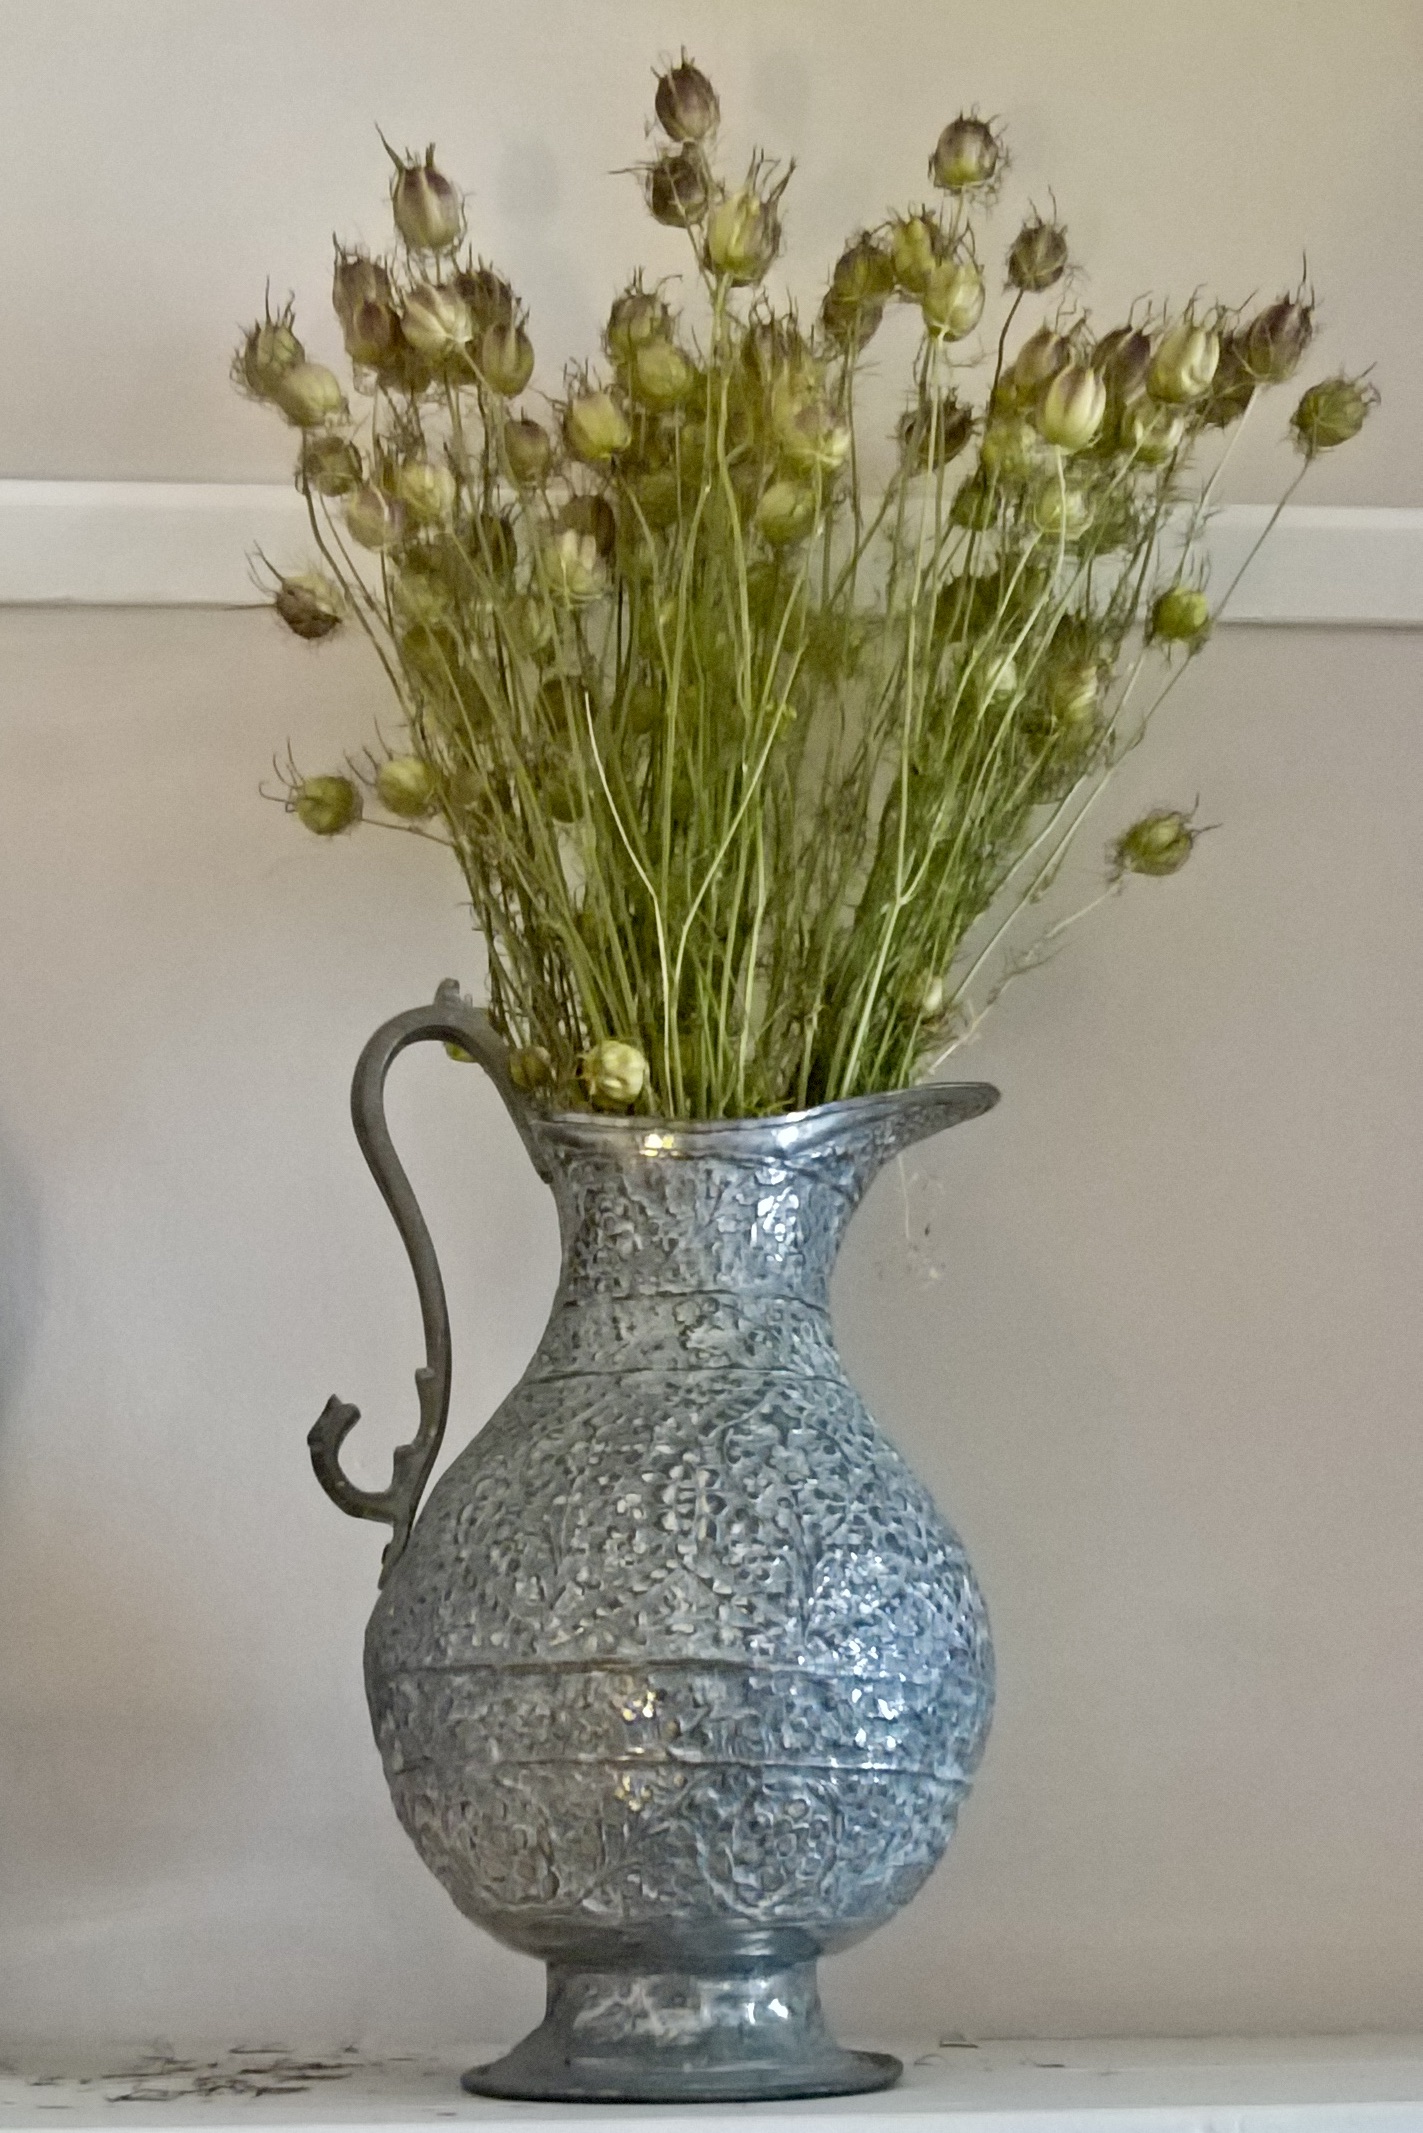 A metal jug with dried flowers